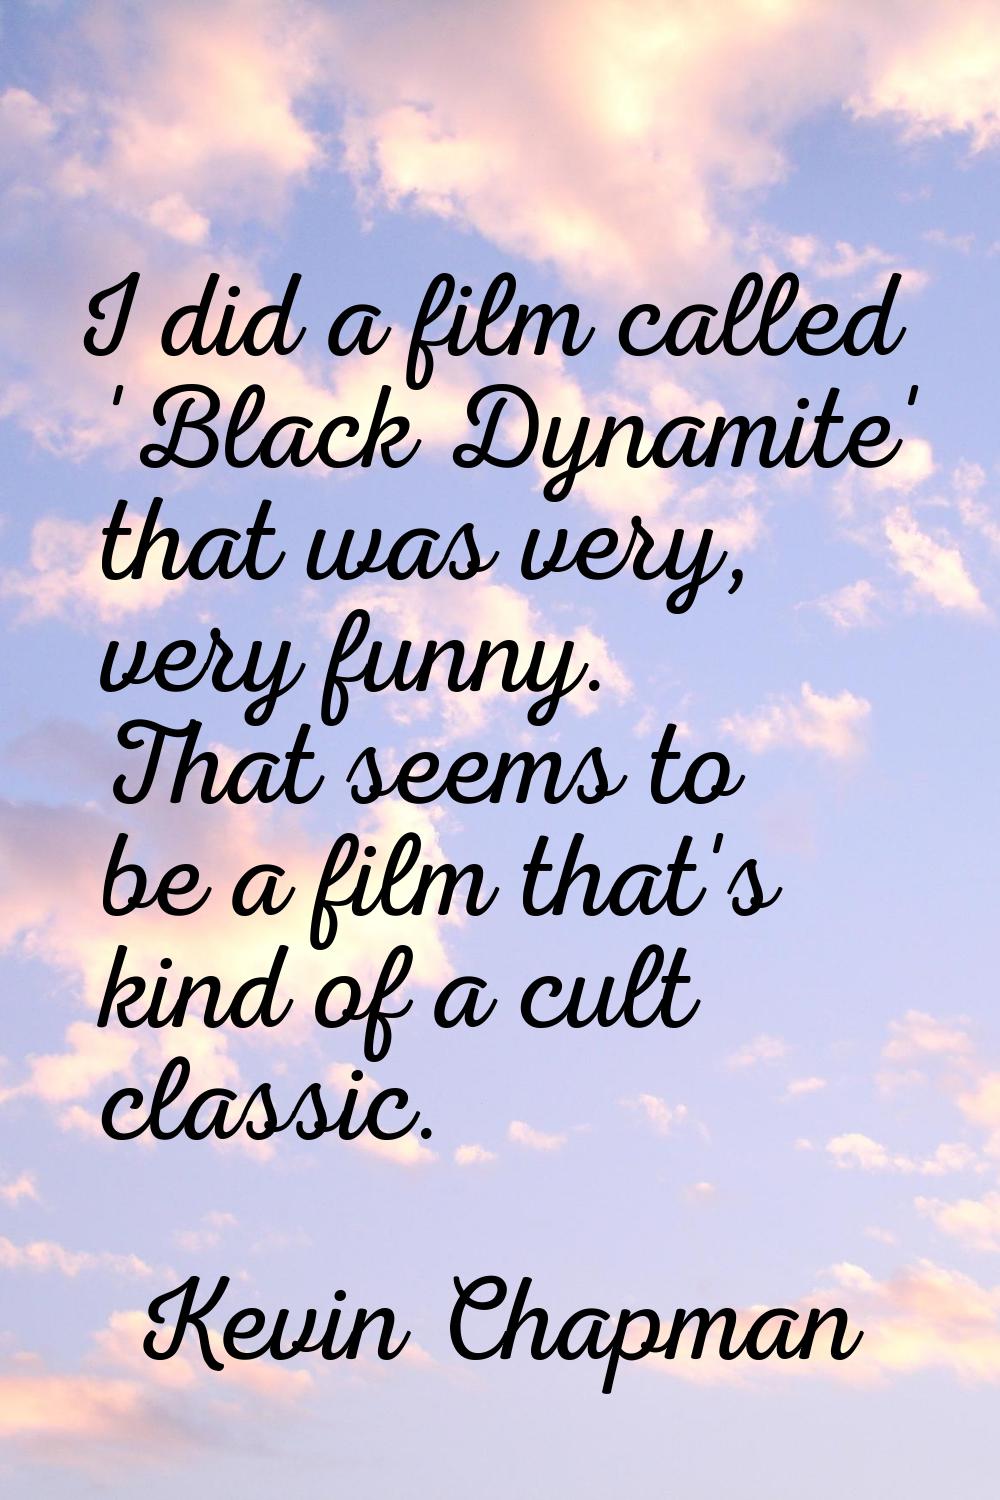 I did a film called 'Black Dynamite' that was very, very funny. That seems to be a film that's kind